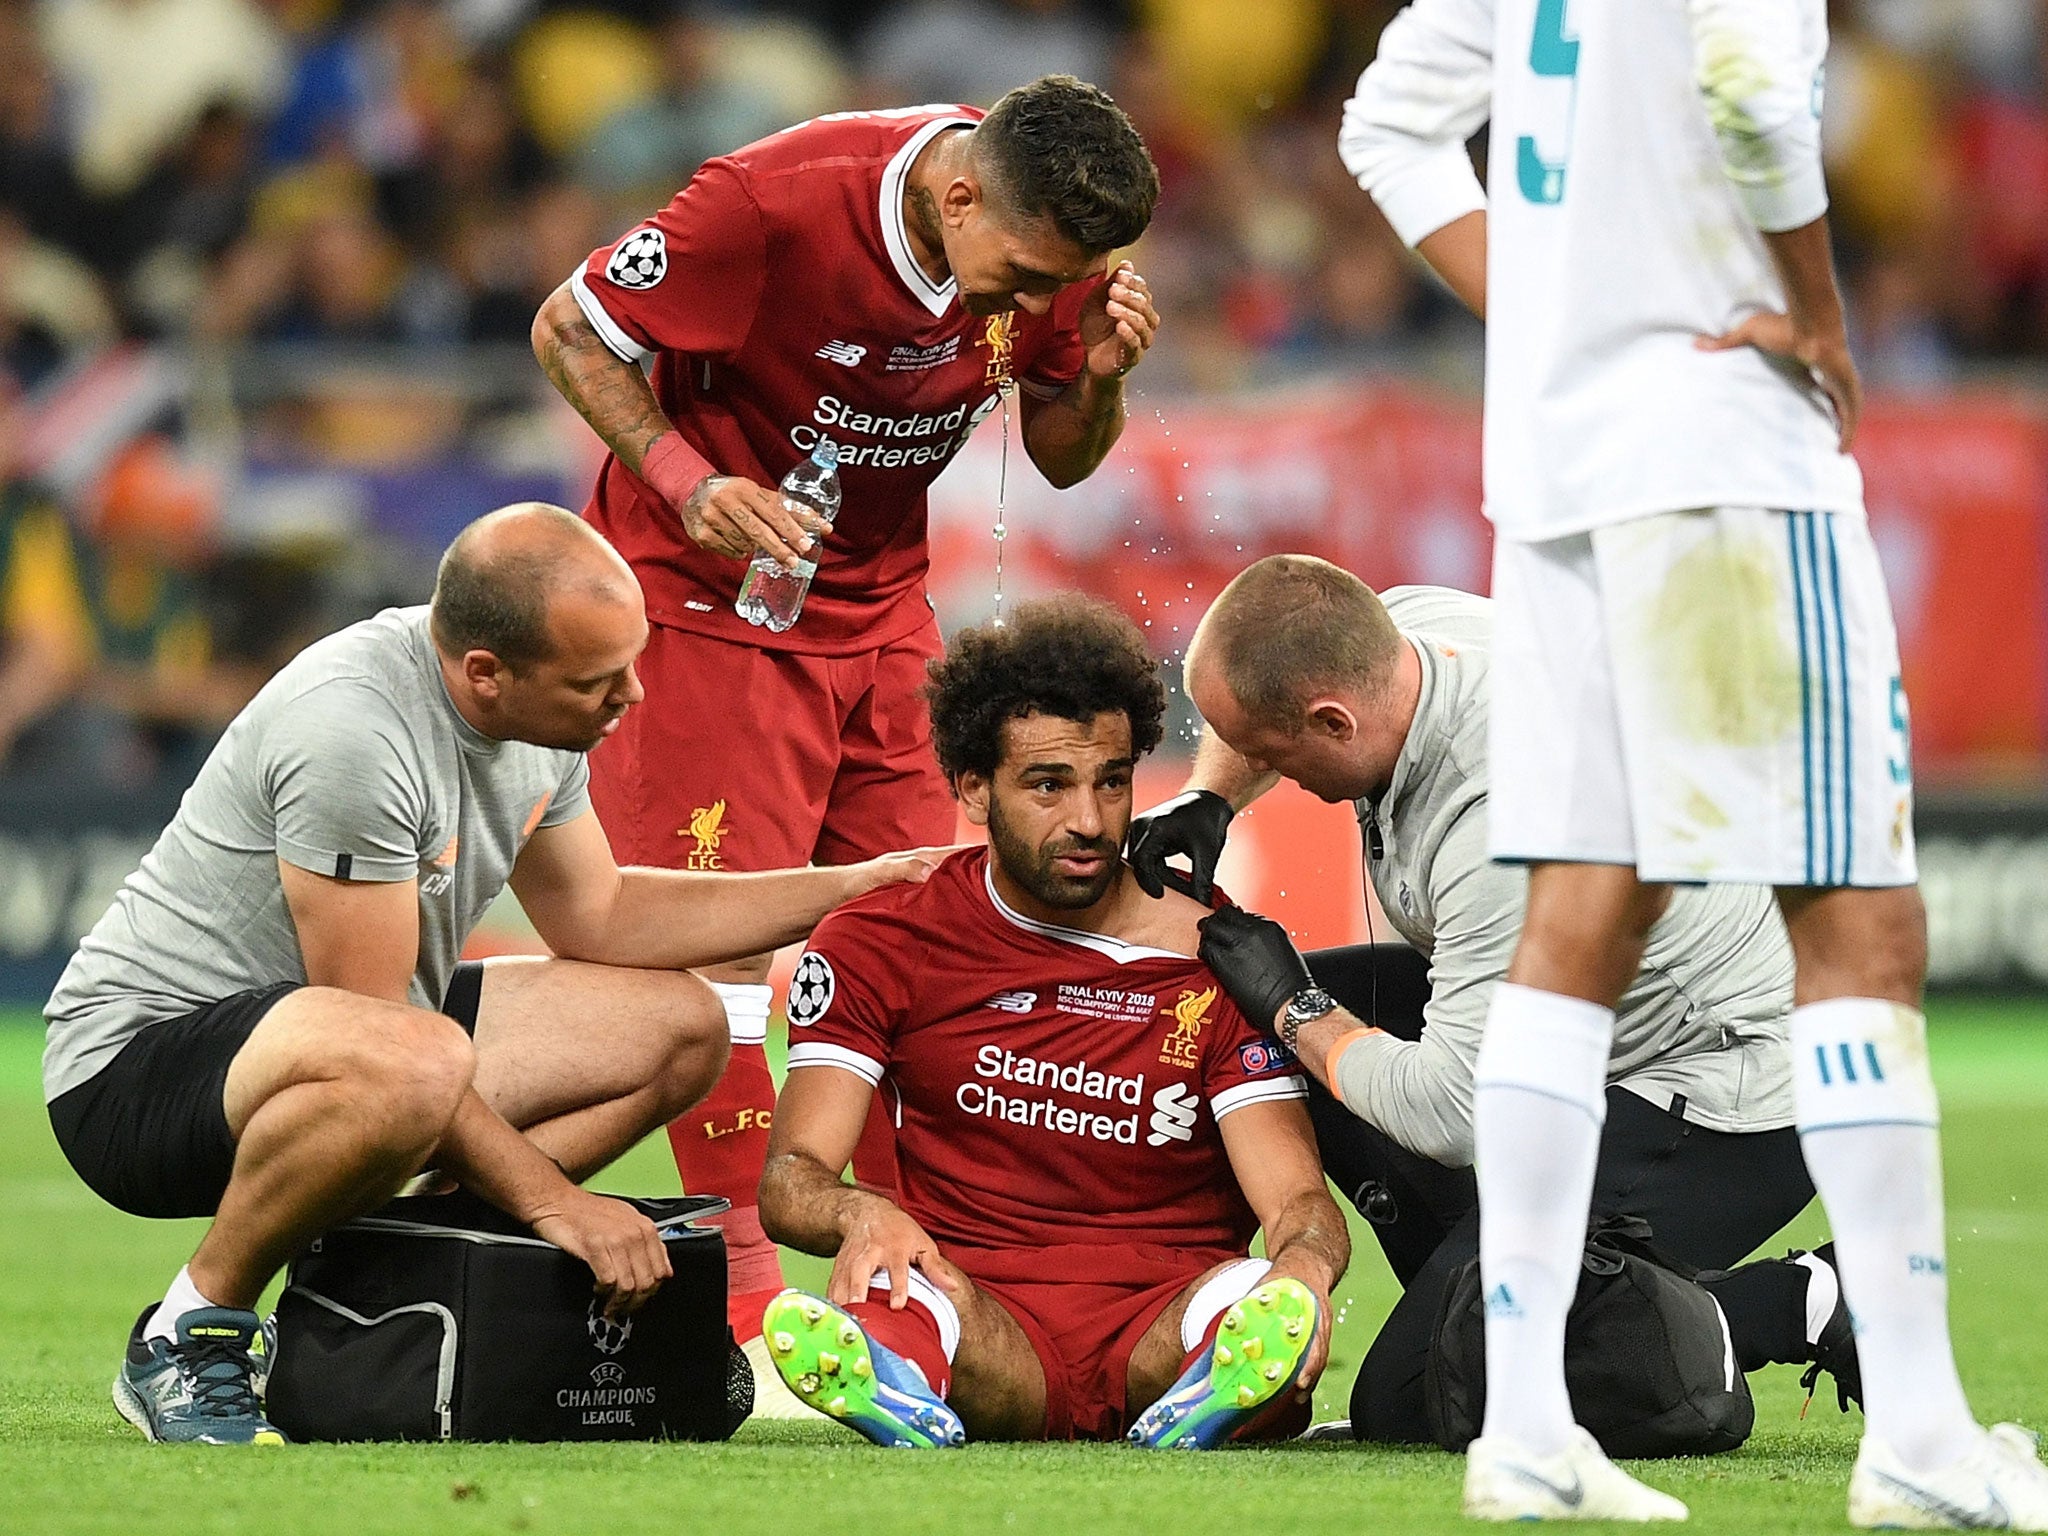 Mohamed Salah injury update: Jurgen Klopp confirms that Egyptian&apos;s World Cup now in doubt